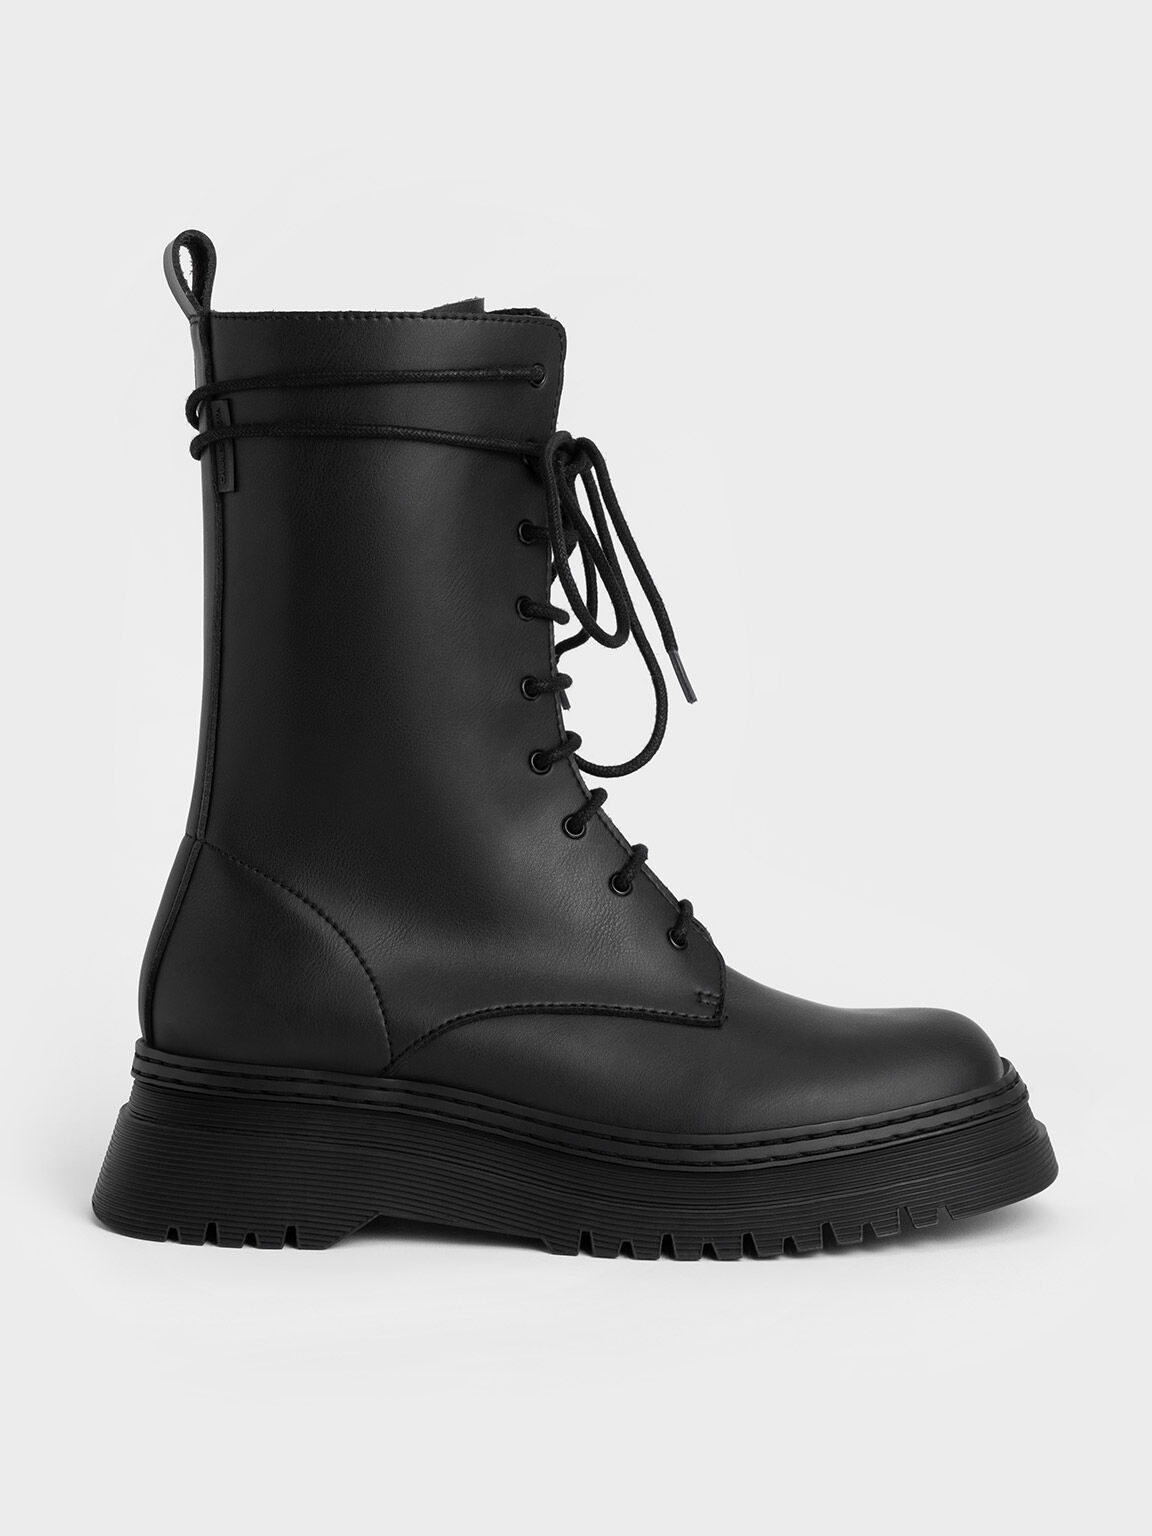 Black Chunky Platform Lace-Up Boots - CHARLES & KEITH KR